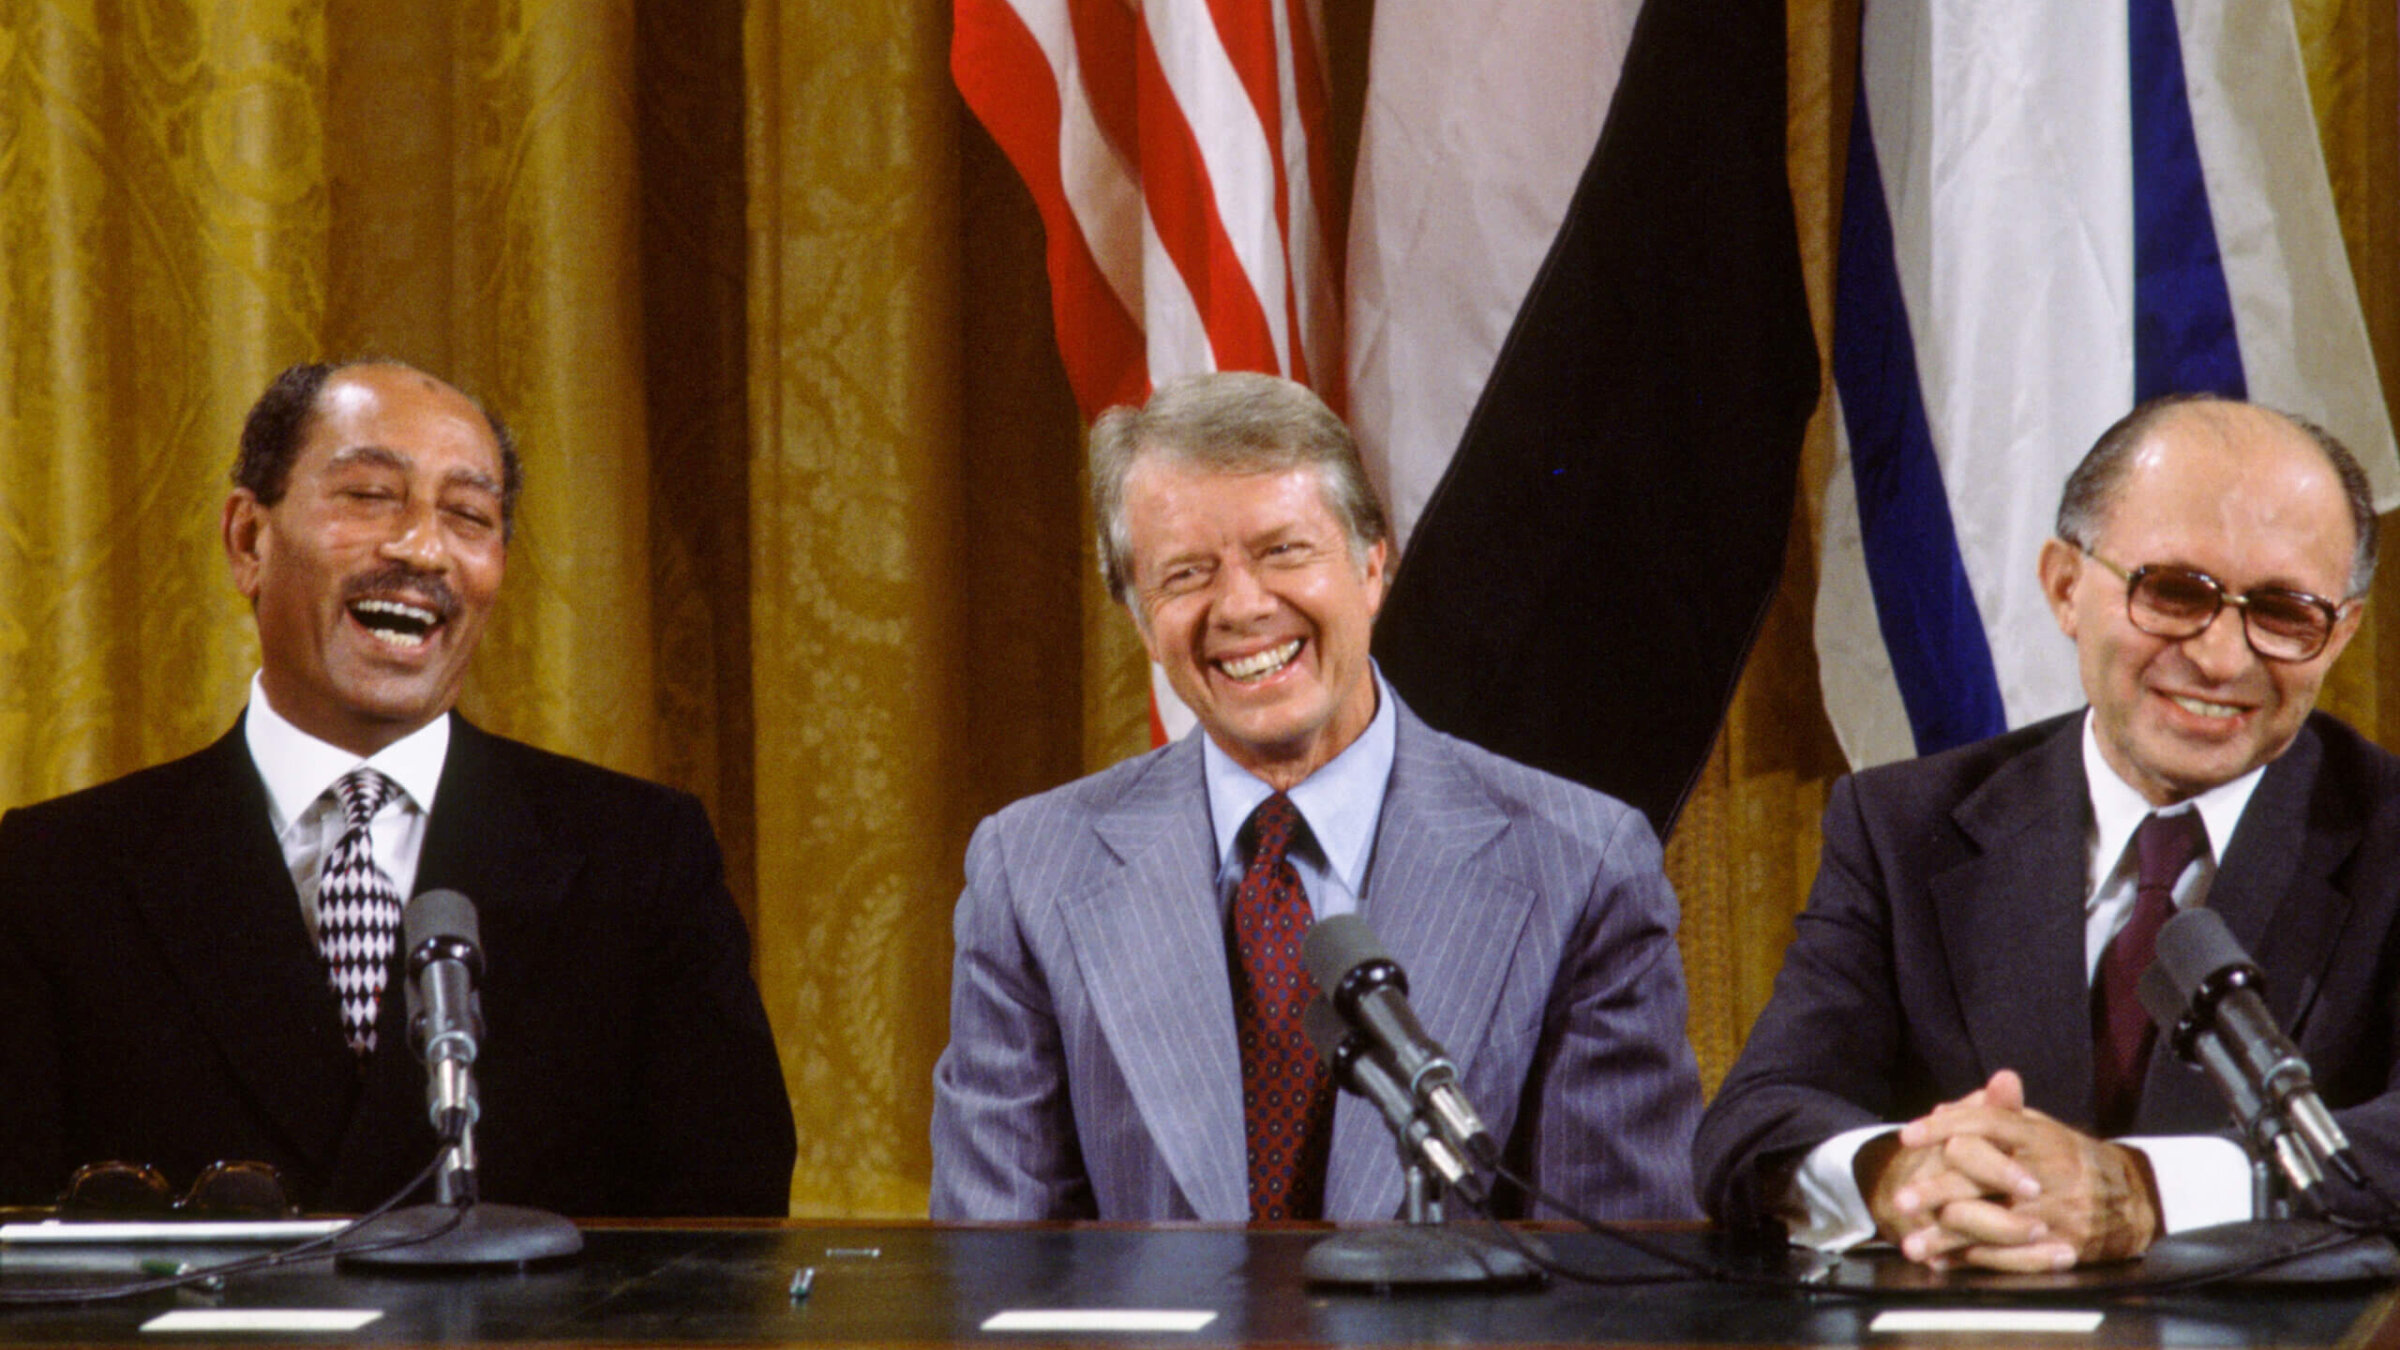 (L to R) Egyptian President Anwar al-Sadat, US President Jimmy Carter, and Israeli Premier Menachem Begin laugh together during the signing the Camp David Accords in the East Room of the White House, September 18, 1978, in Washington, DC. The agreement came after twelve days of secret negotiations at Camp David.